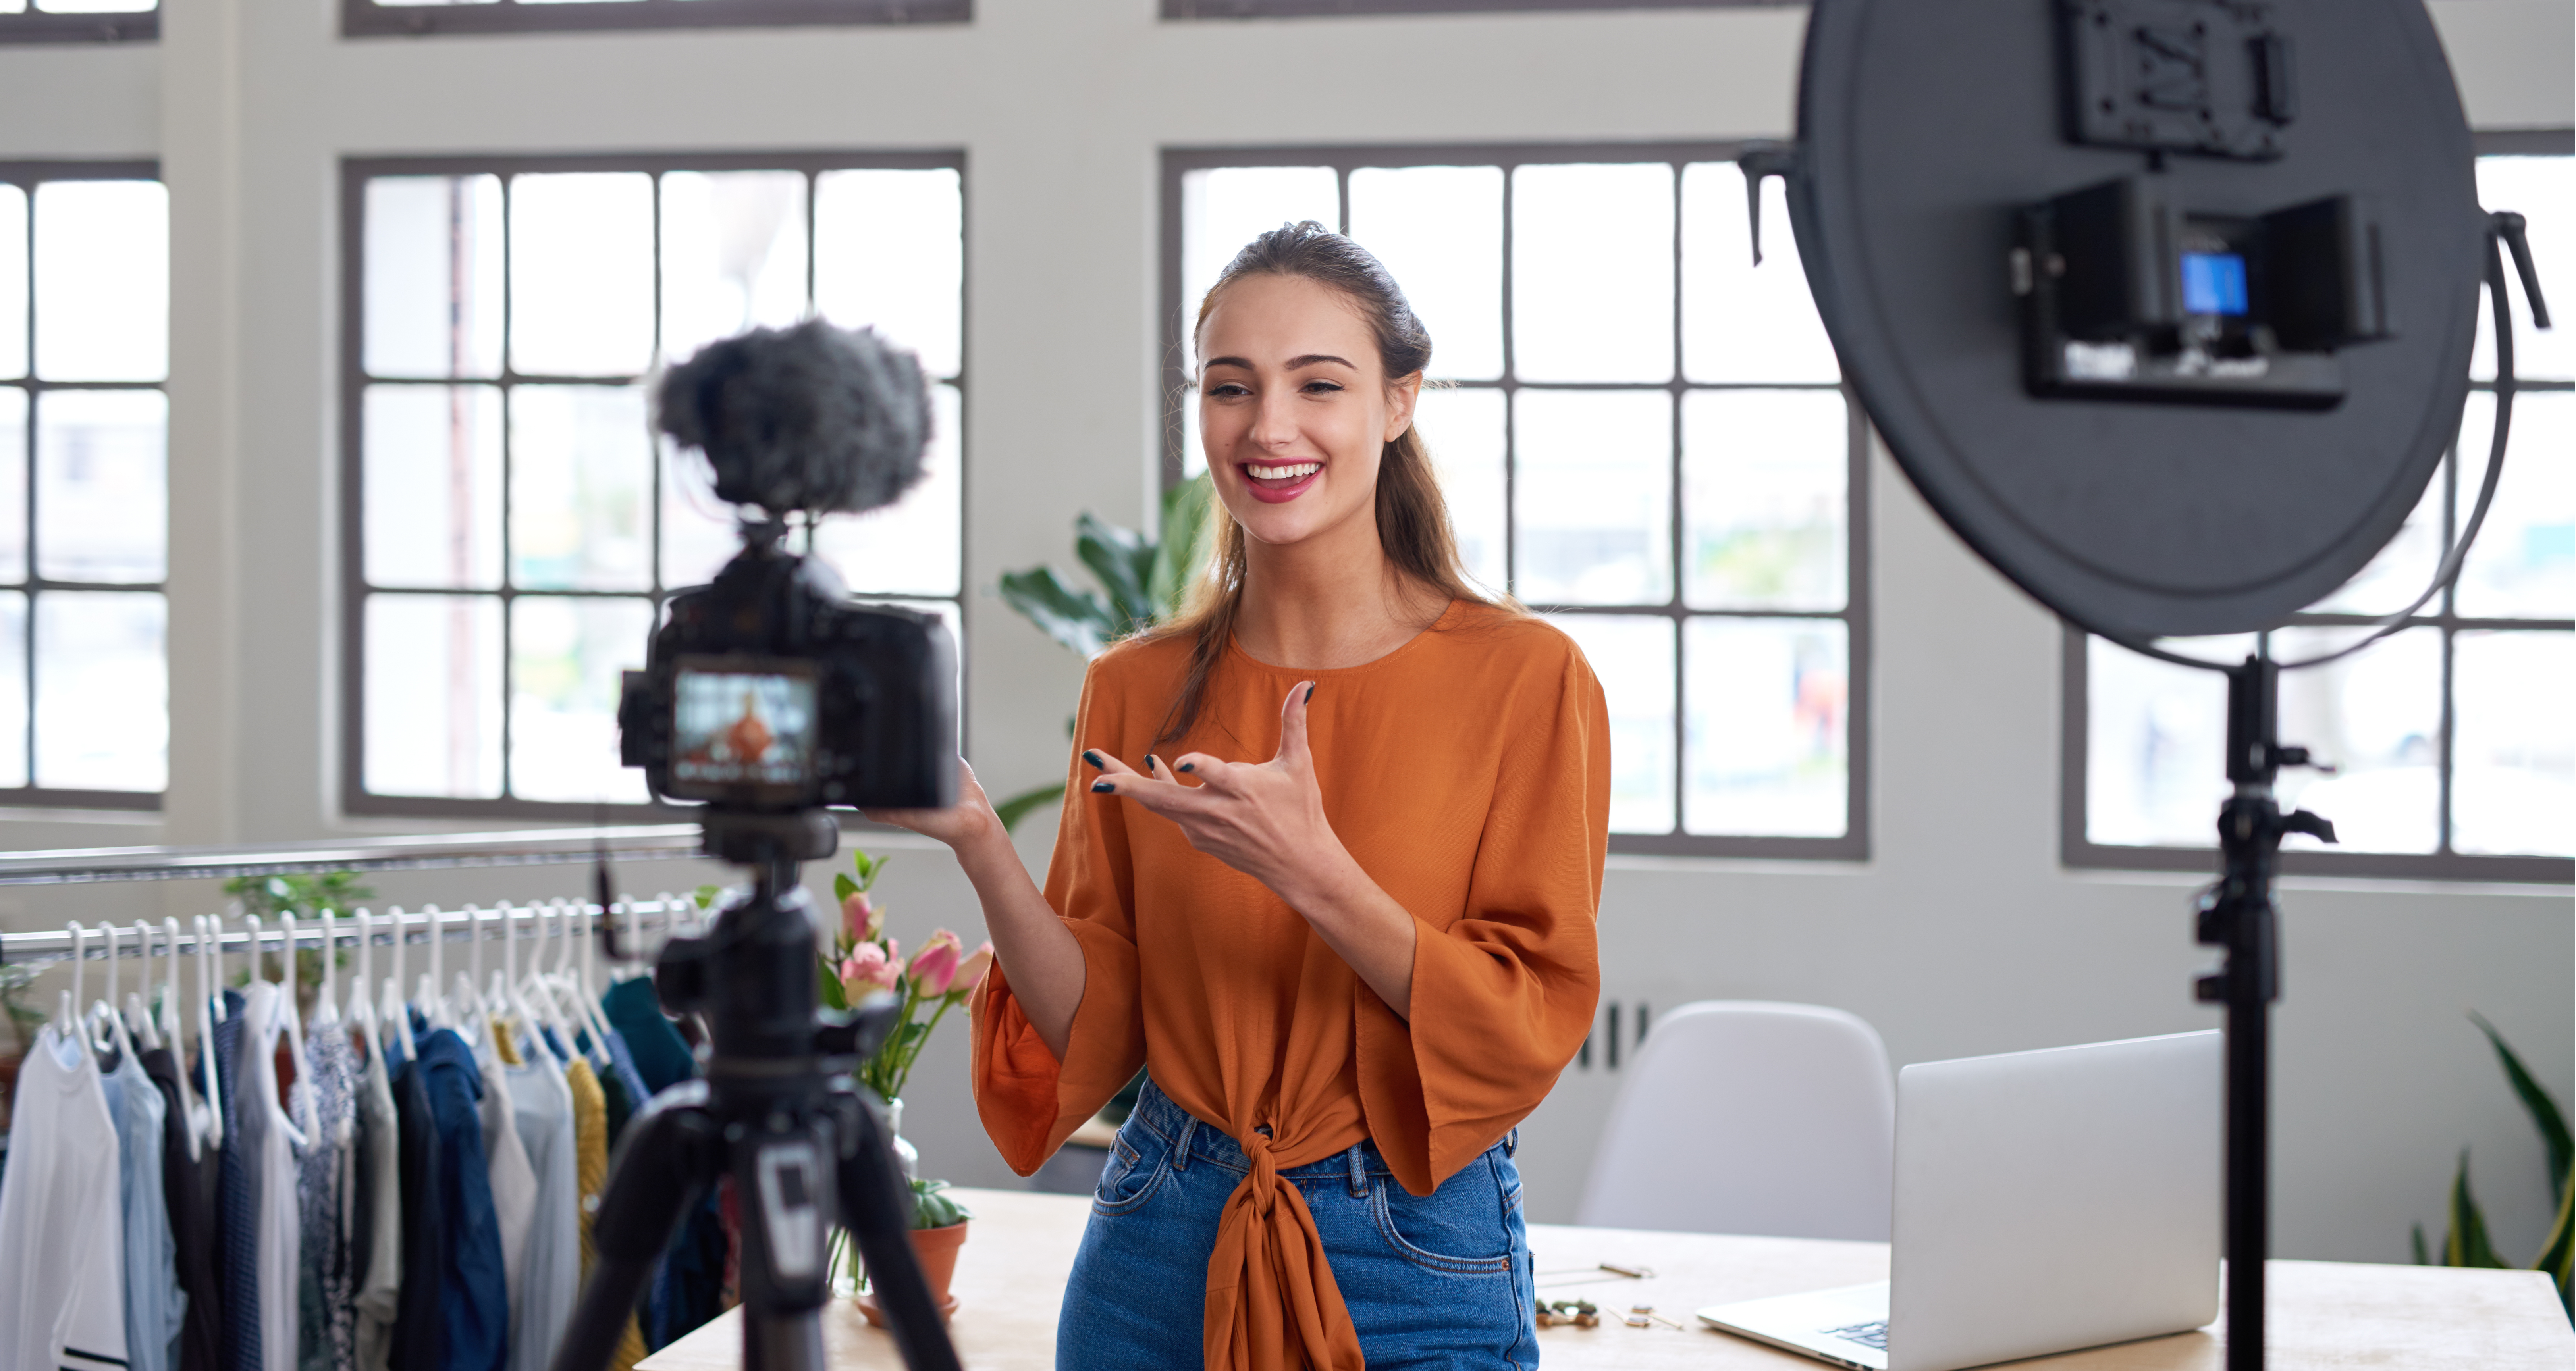 Image of an influencer talking to a camera.